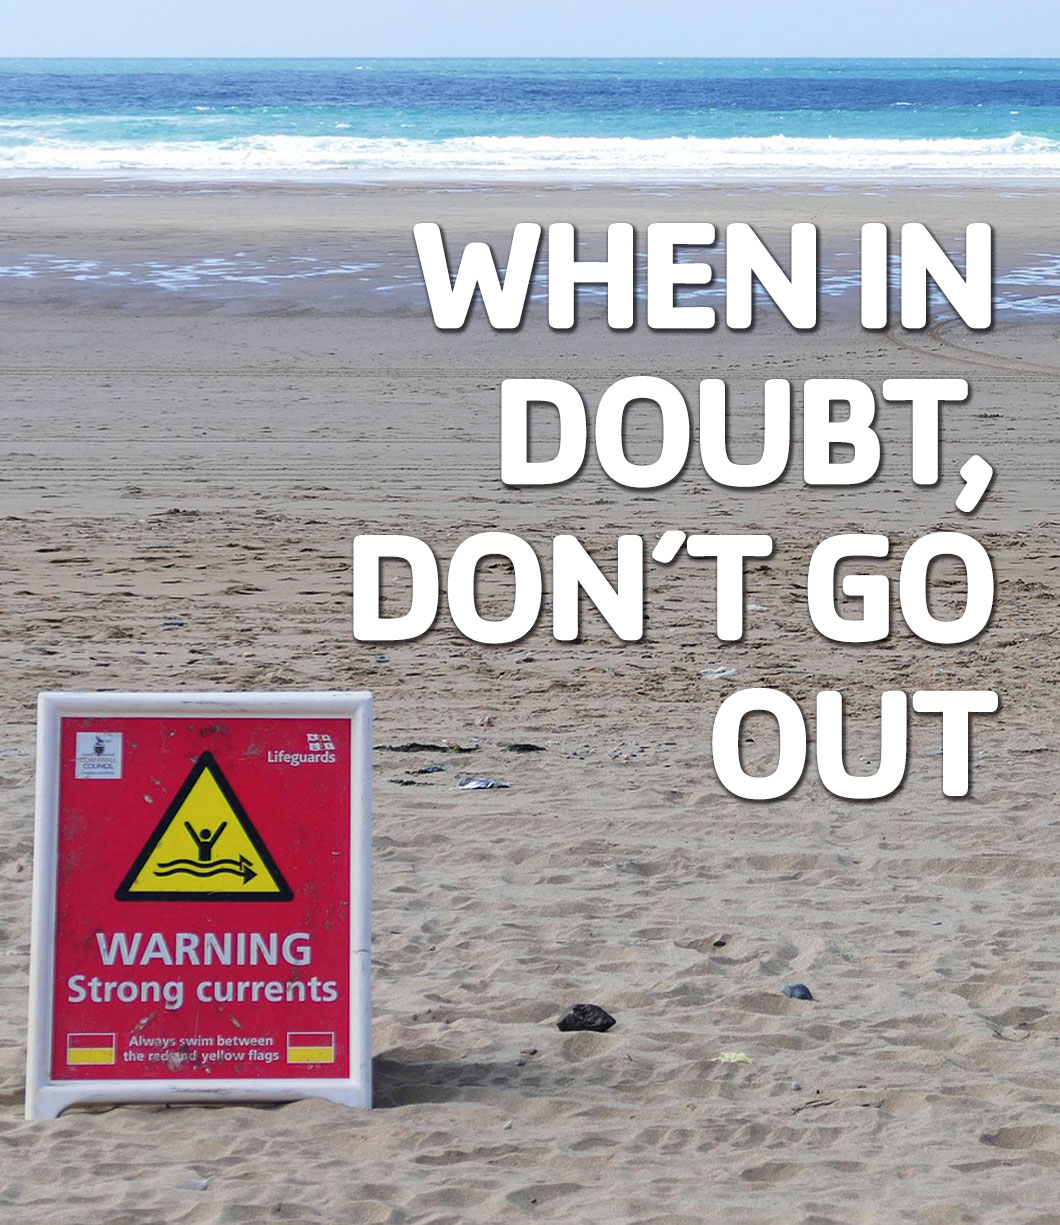 "When in Doubt don't go out" with a Sign on the beach with a strong current warning and logos of organizations promoting water safety